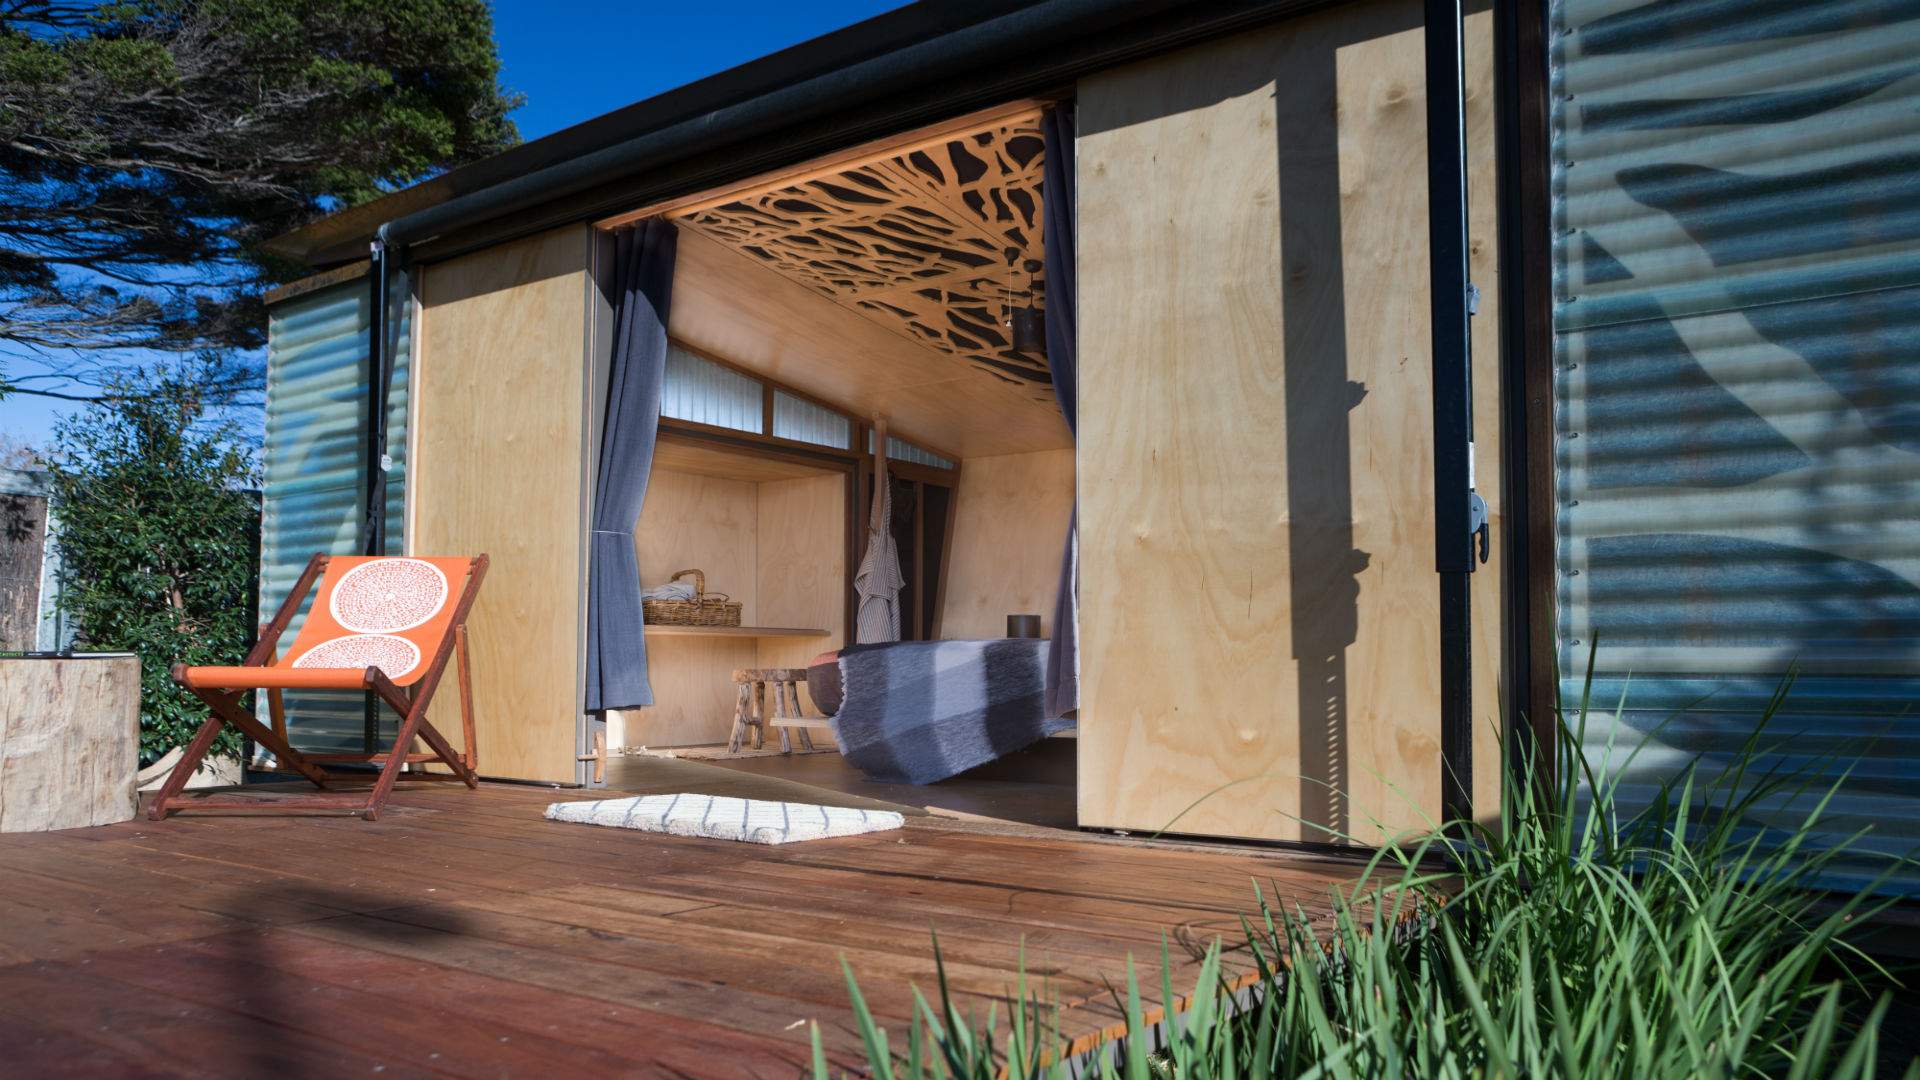 Parks Victoria Is Trialling New Eco Sleeper Pods in Point Nepean National Park